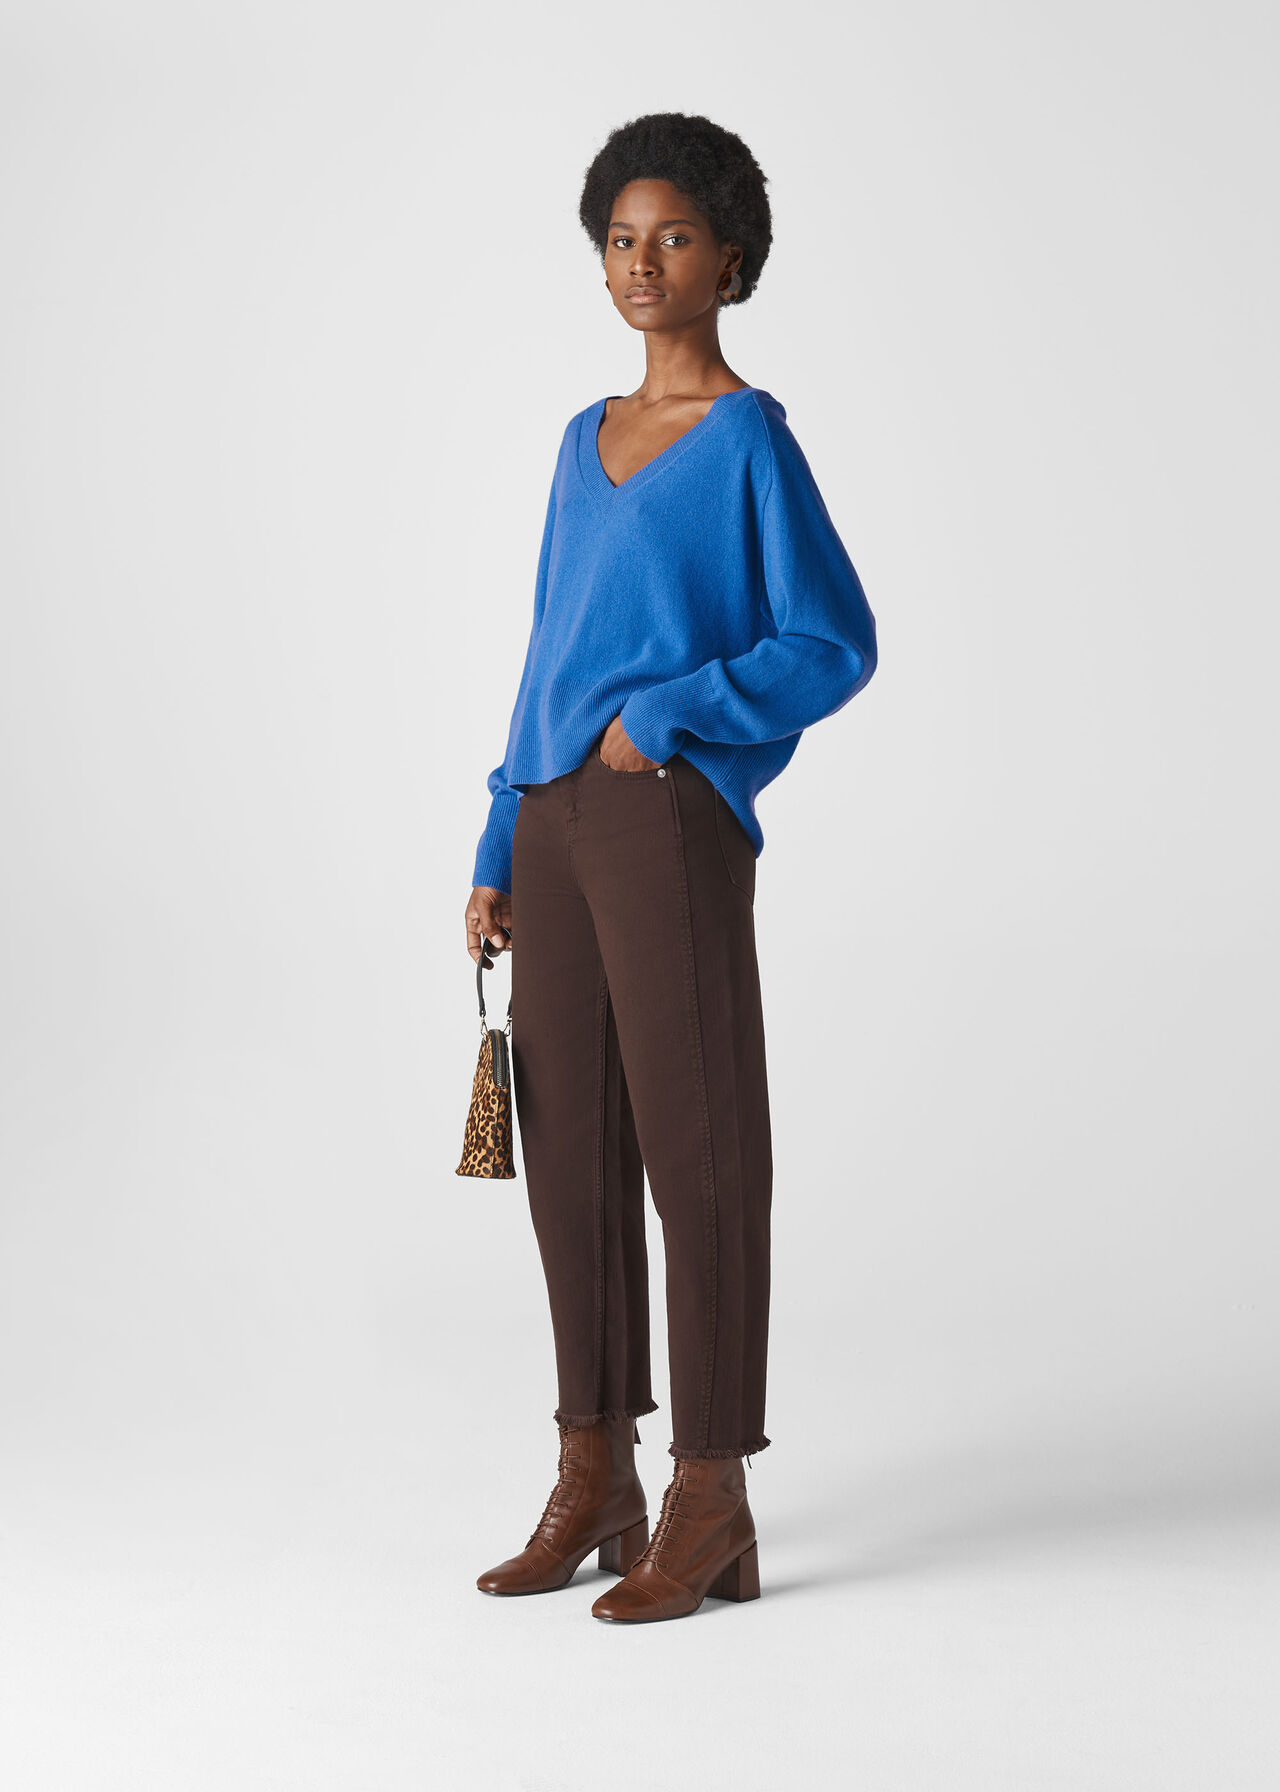 Sustainable Cashmere Jumper Blue